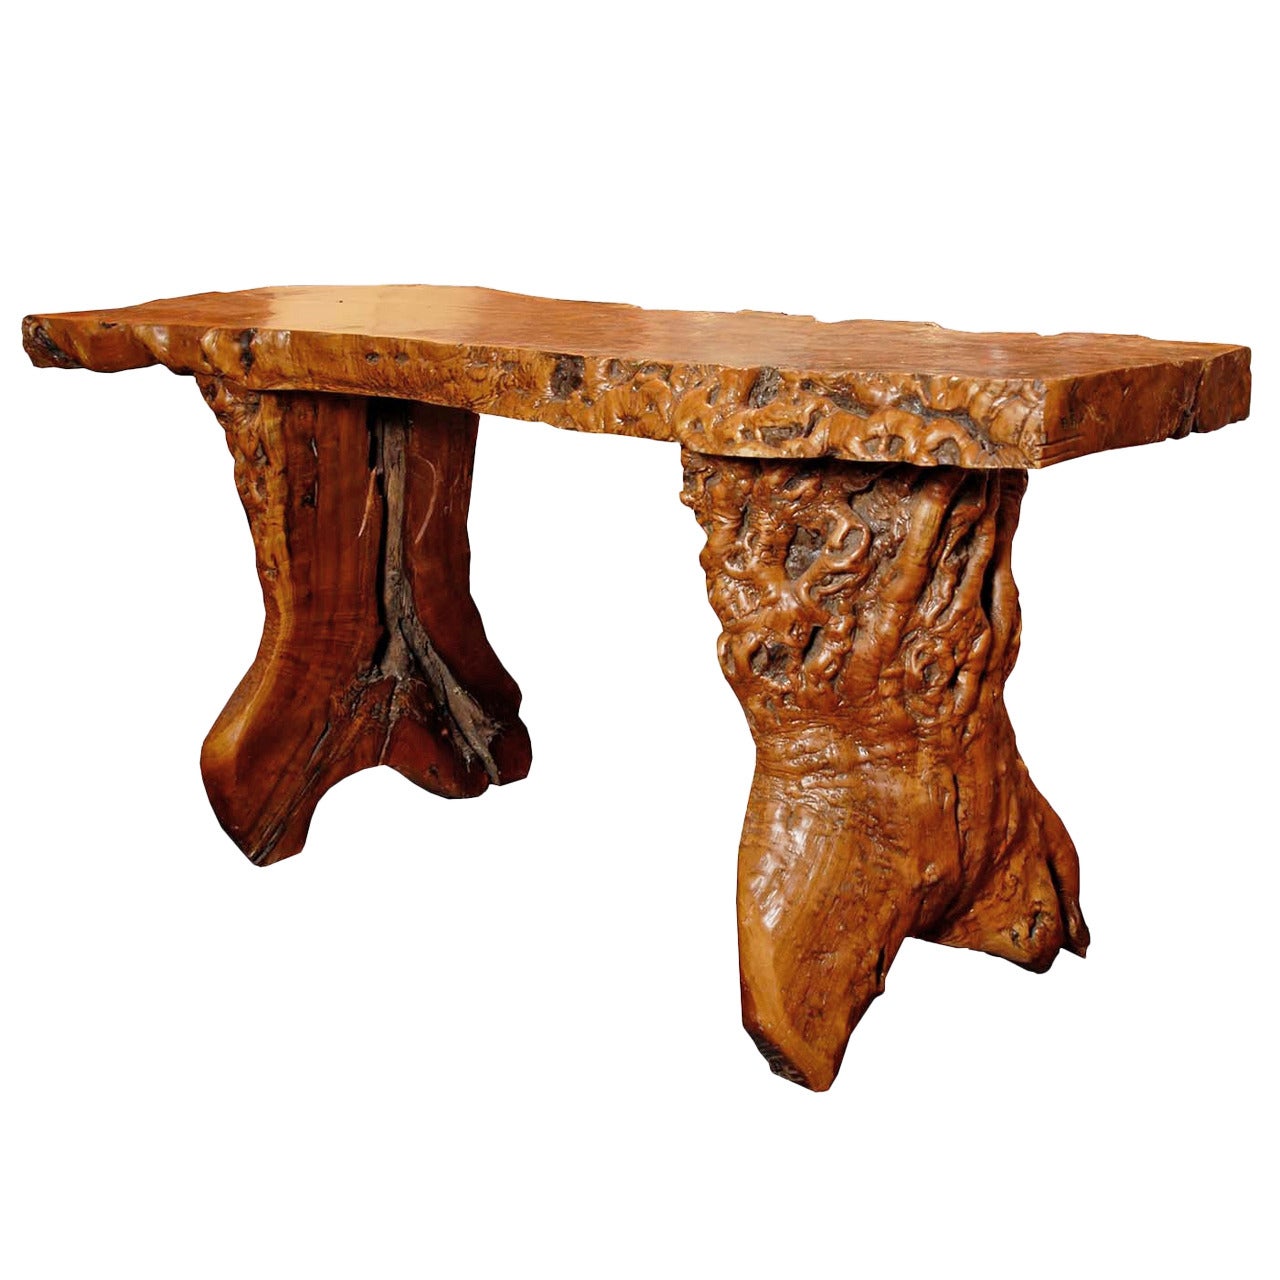 Antique Chinese Burl Wood Table